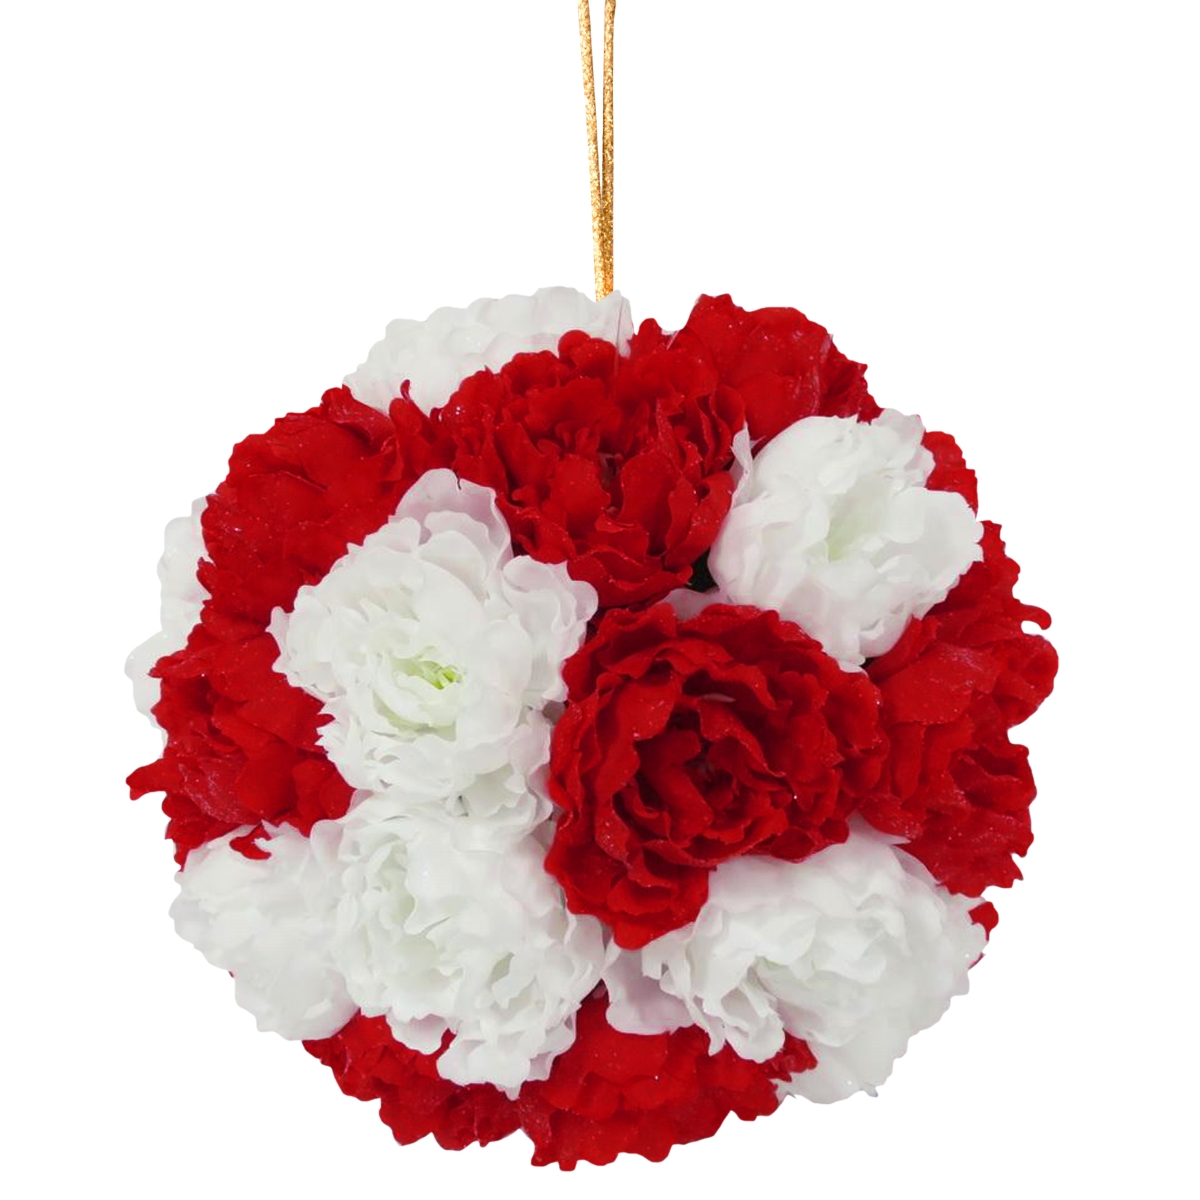 12.6 In. Glittery Peony Hanging Ball, Red & White